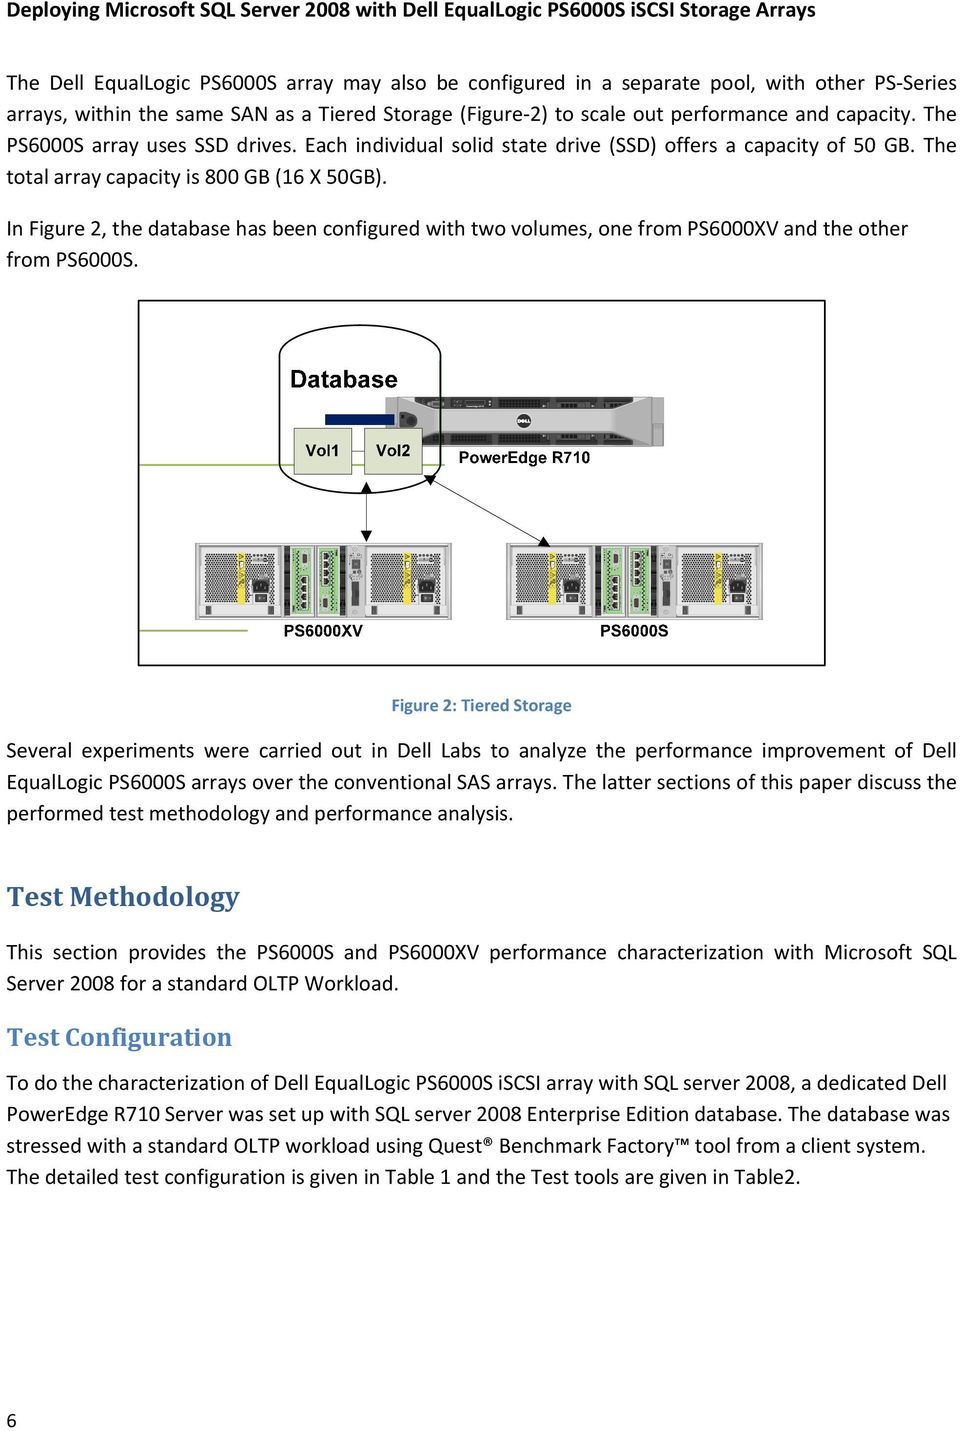 In Figure 2, the database has been configured with two volumes, one from PS6000XV and the other from PS6000S.